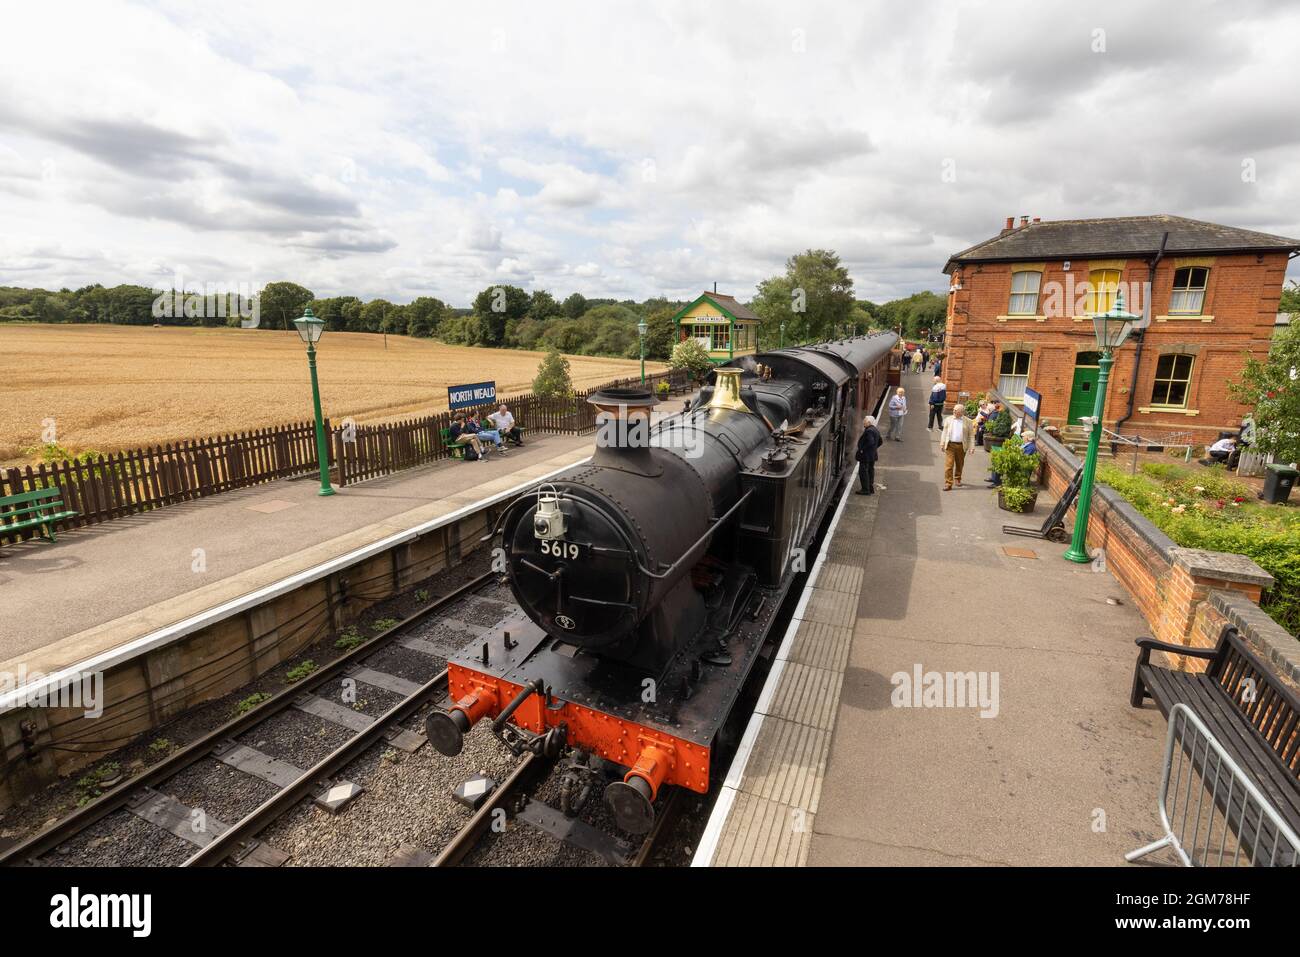 Steam engine UK - a steam train at the platform, North Weald Station, on the Epping-Ongar Railway line, a heritage railway in Essex UK Stock Photo